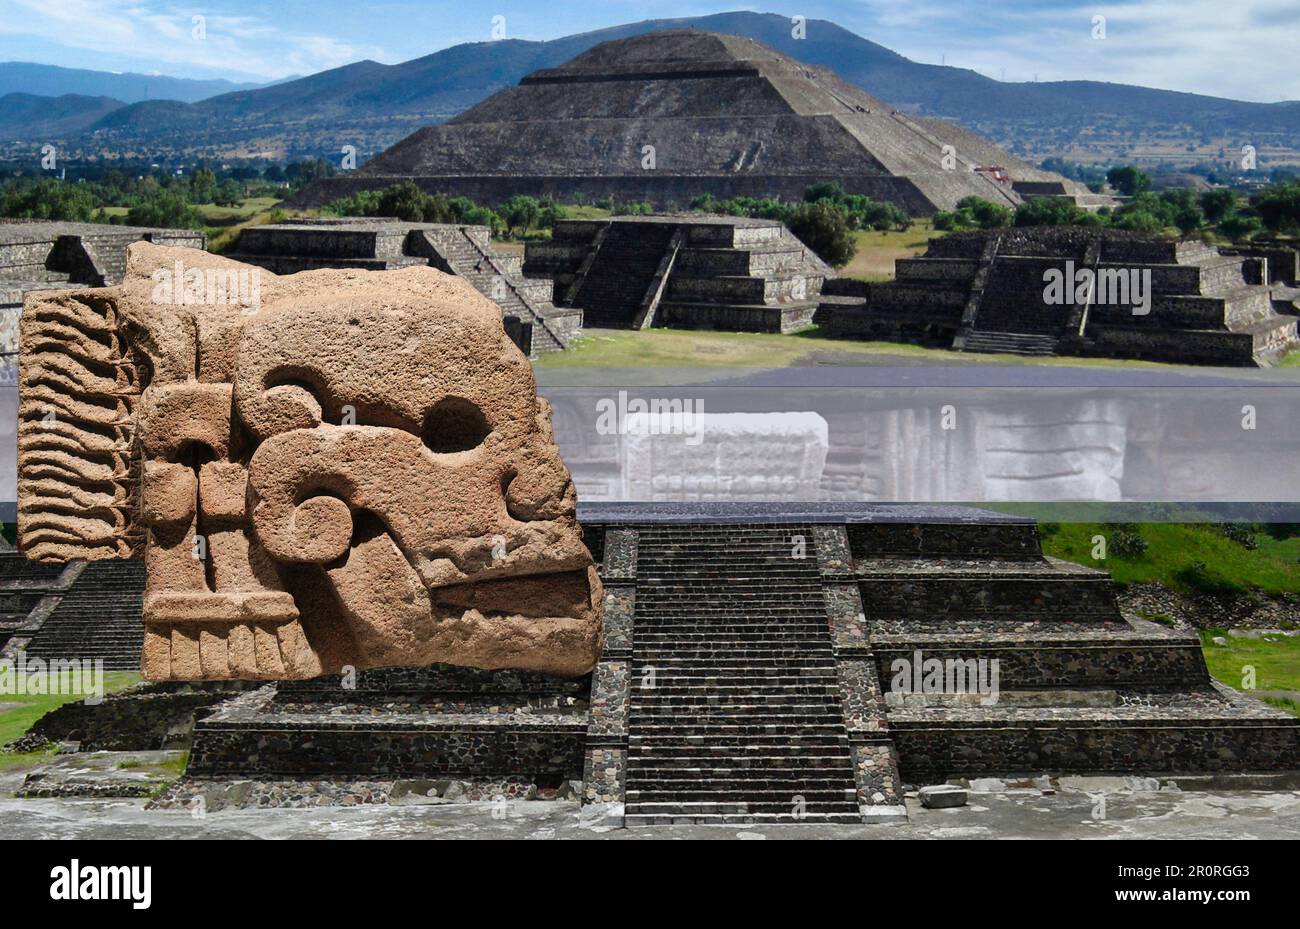 Teotihuacan Ancient Mesoamerican city, located in central Mexico, Famous for its mysterious pyramids and beautiful painted walls Stock Photo